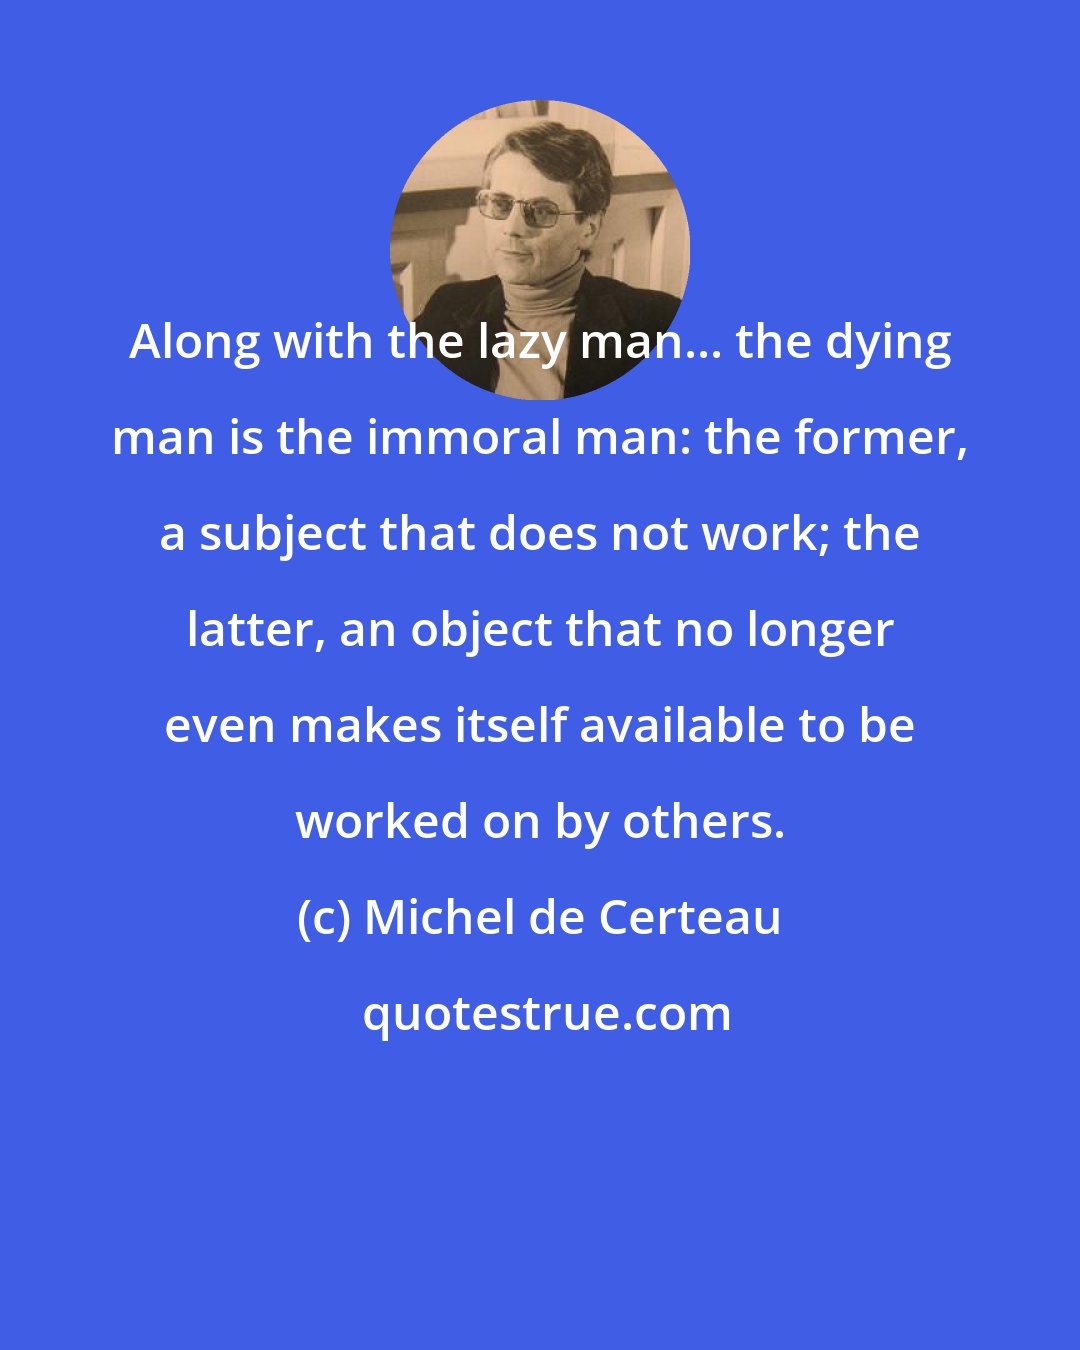 Michel de Certeau: Along with the lazy man... the dying man is the immoral man: the former, a subject that does not work; the latter, an object that no longer even makes itself available to be worked on by others.